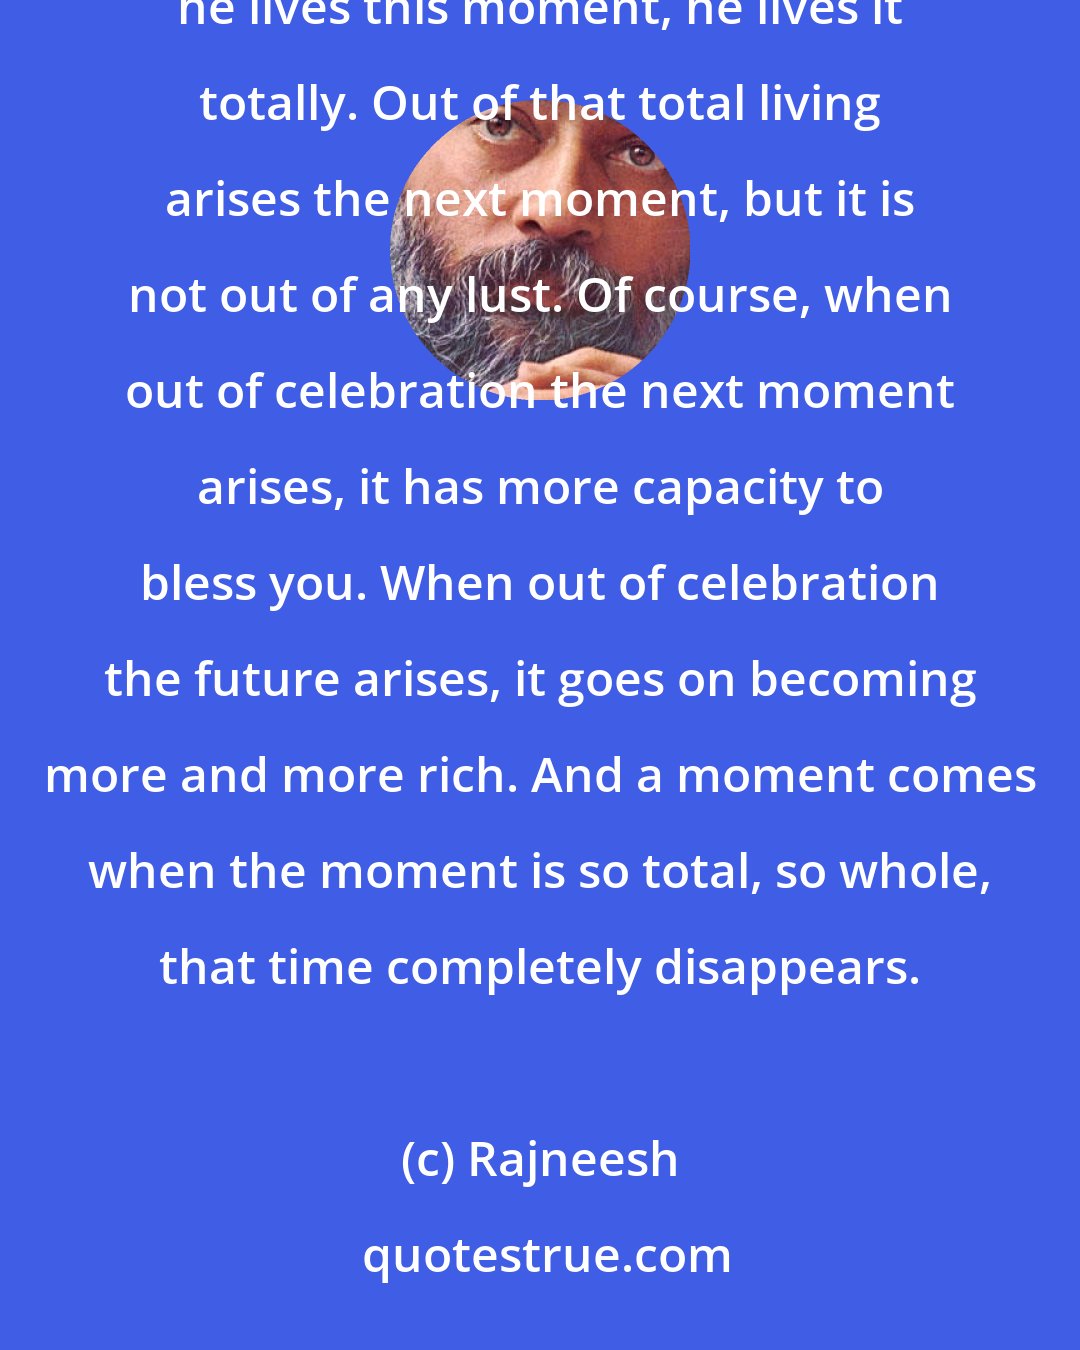 Rajneesh: Future arises out of your misery, not out of your celebration. A really celebrating person has no future; he lives this moment, he lives it totally. Out of that total living arises the next moment, but it is not out of any lust. Of course, when out of celebration the next moment arises, it has more capacity to bless you. When out of celebration the future arises, it goes on becoming more and more rich. And a moment comes when the moment is so total, so whole, that time completely disappears.